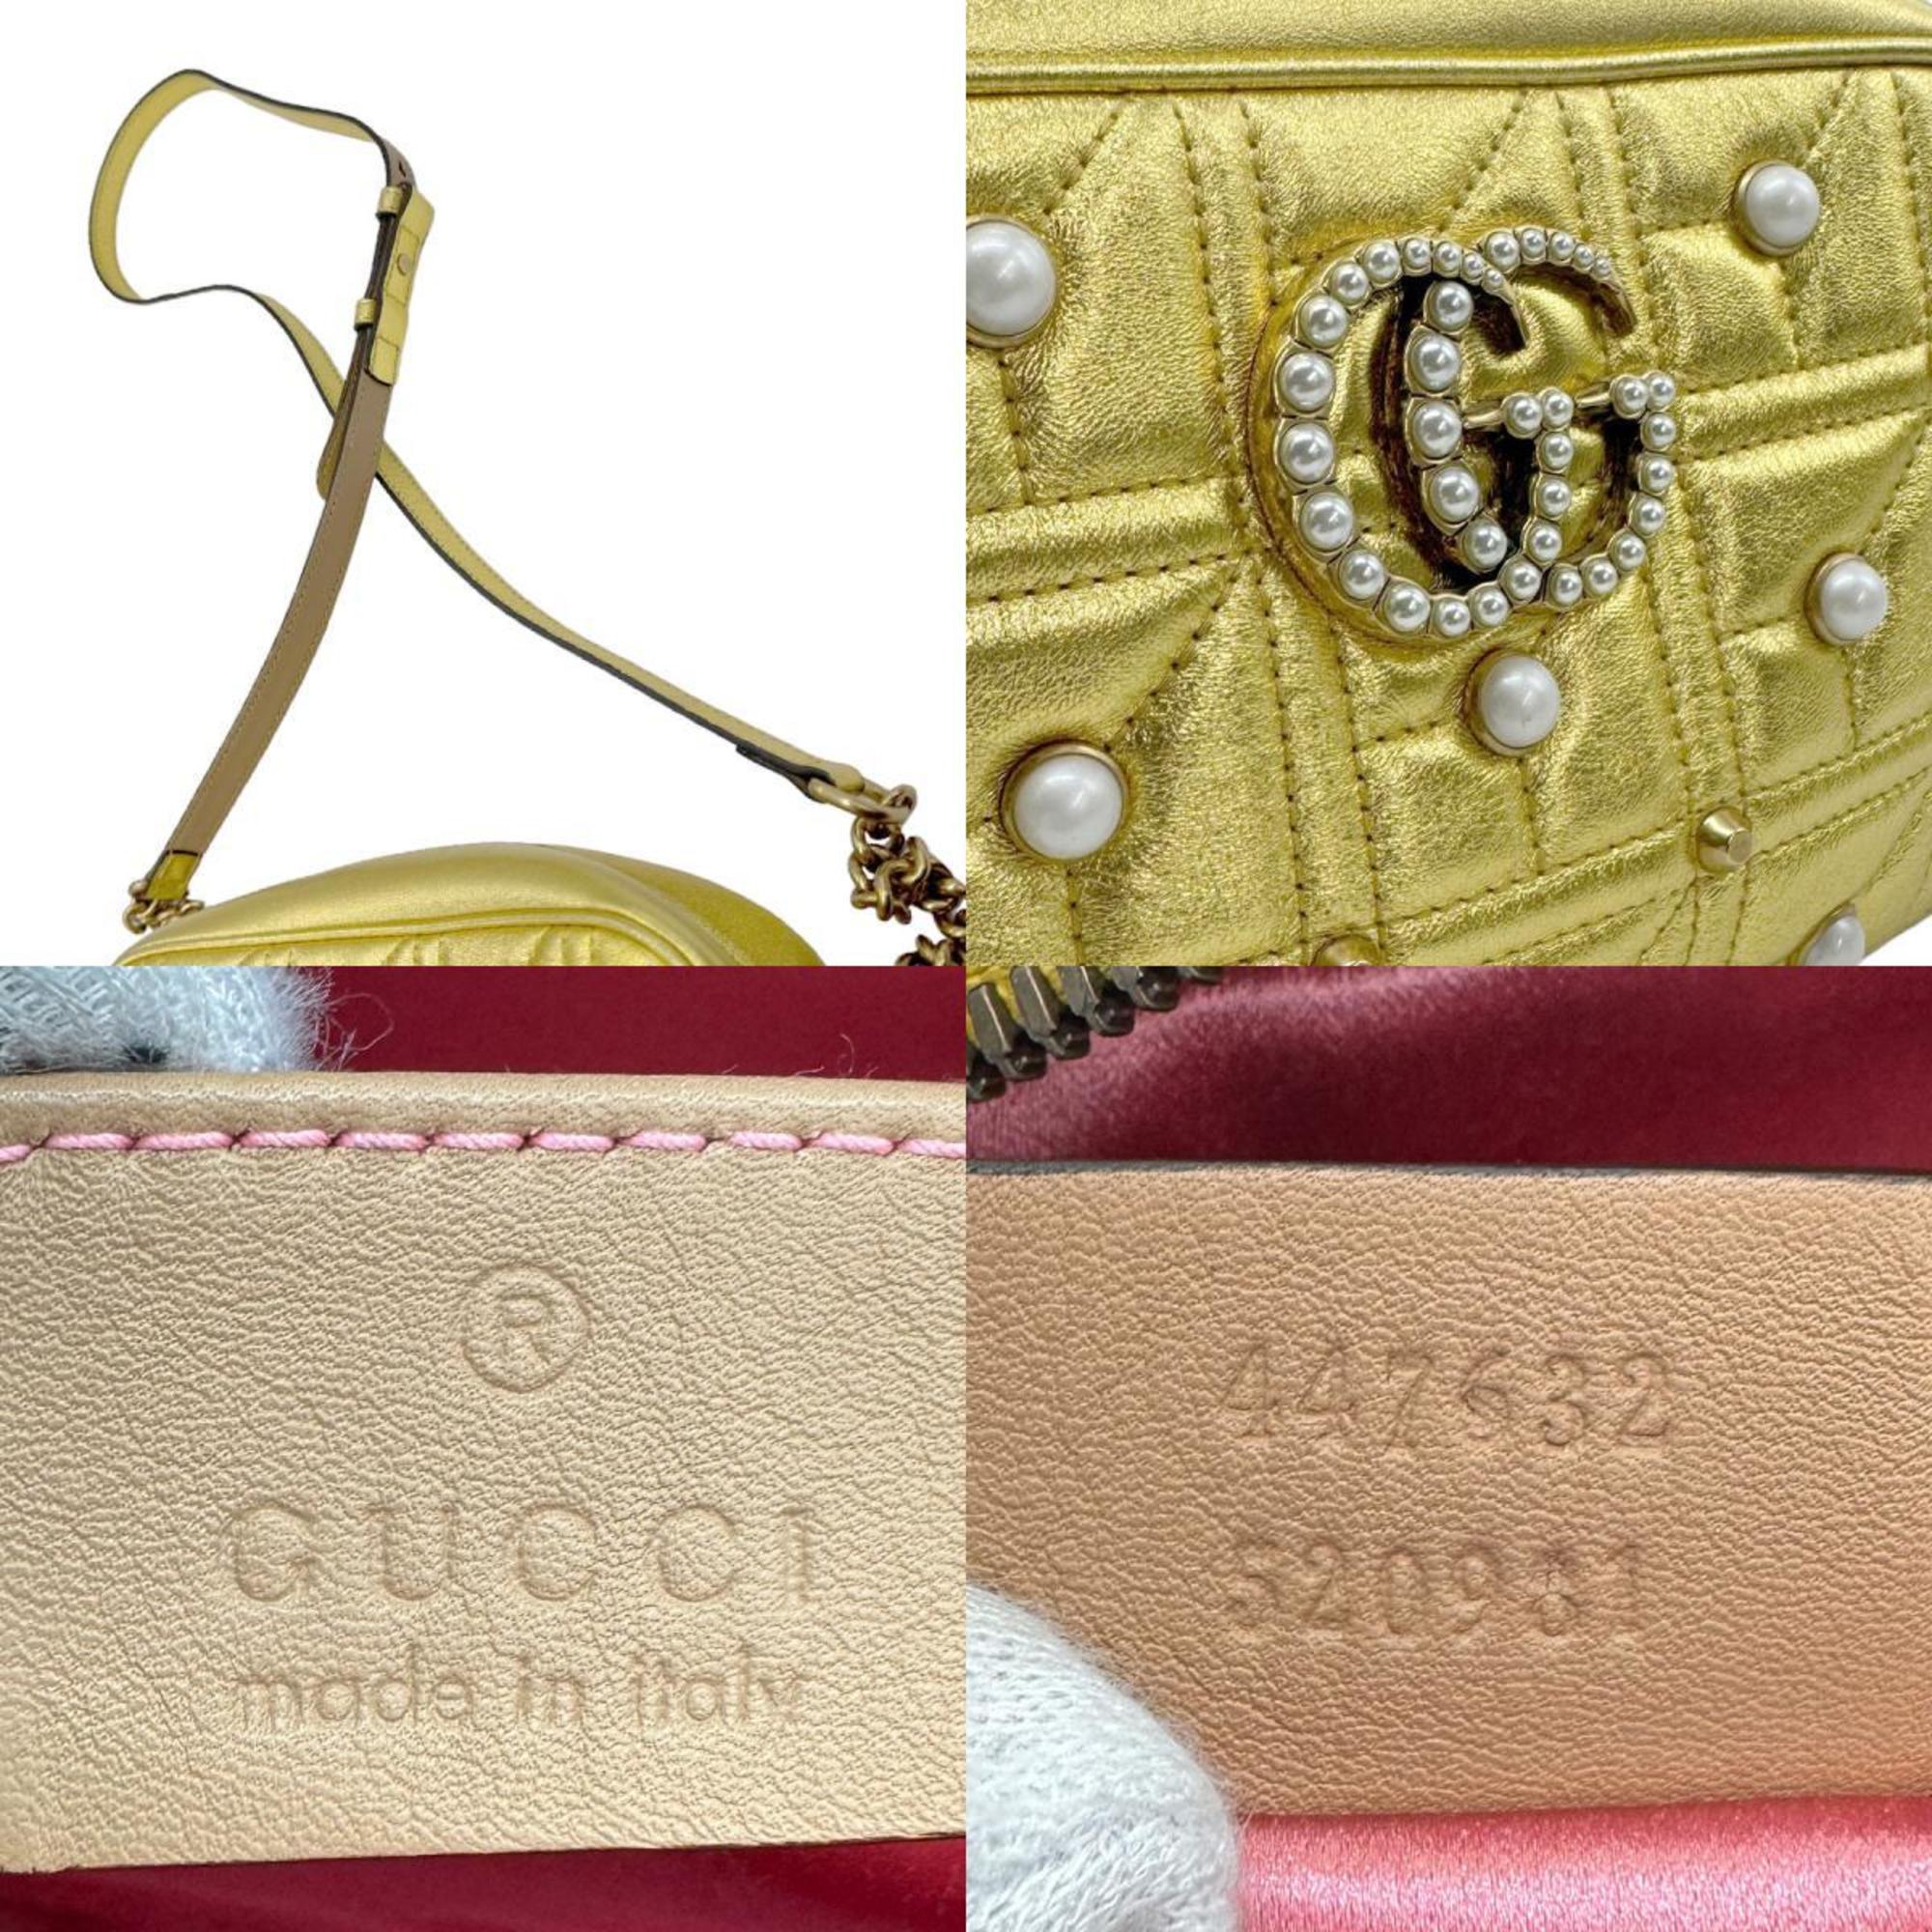 GUCCI Shoulder Bag GG Marmont Leather/Faux Pearl Gold Women's 447632 z0772